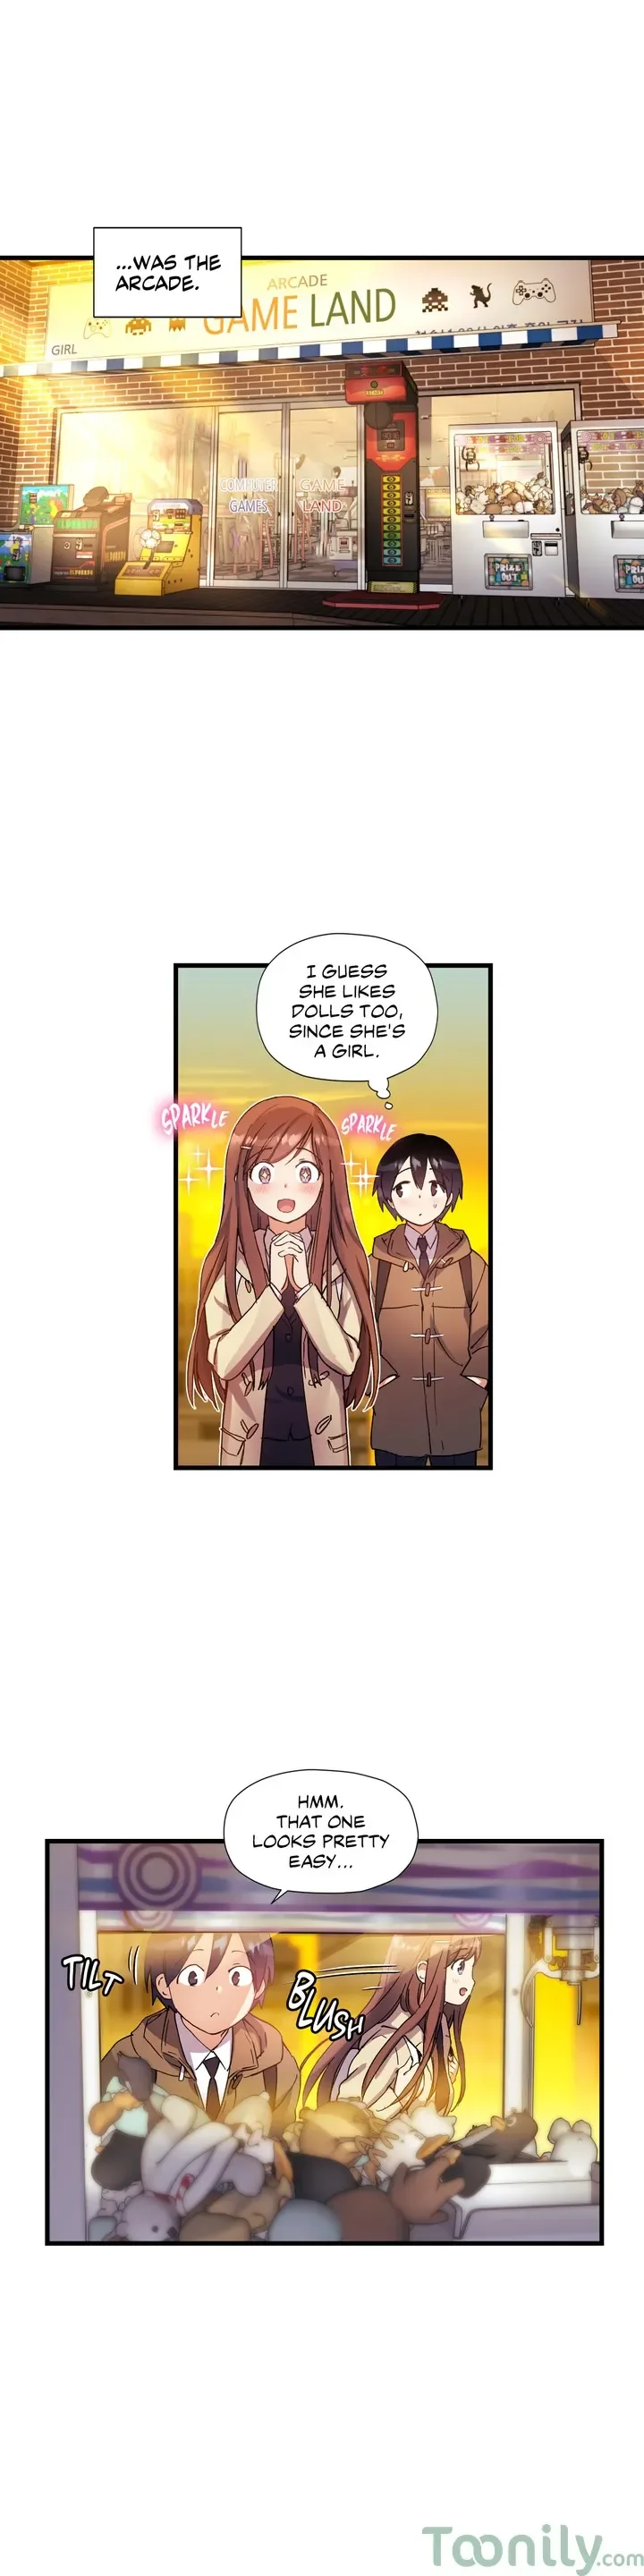 under-observation-my-first-loves-and-i-chap-35-8